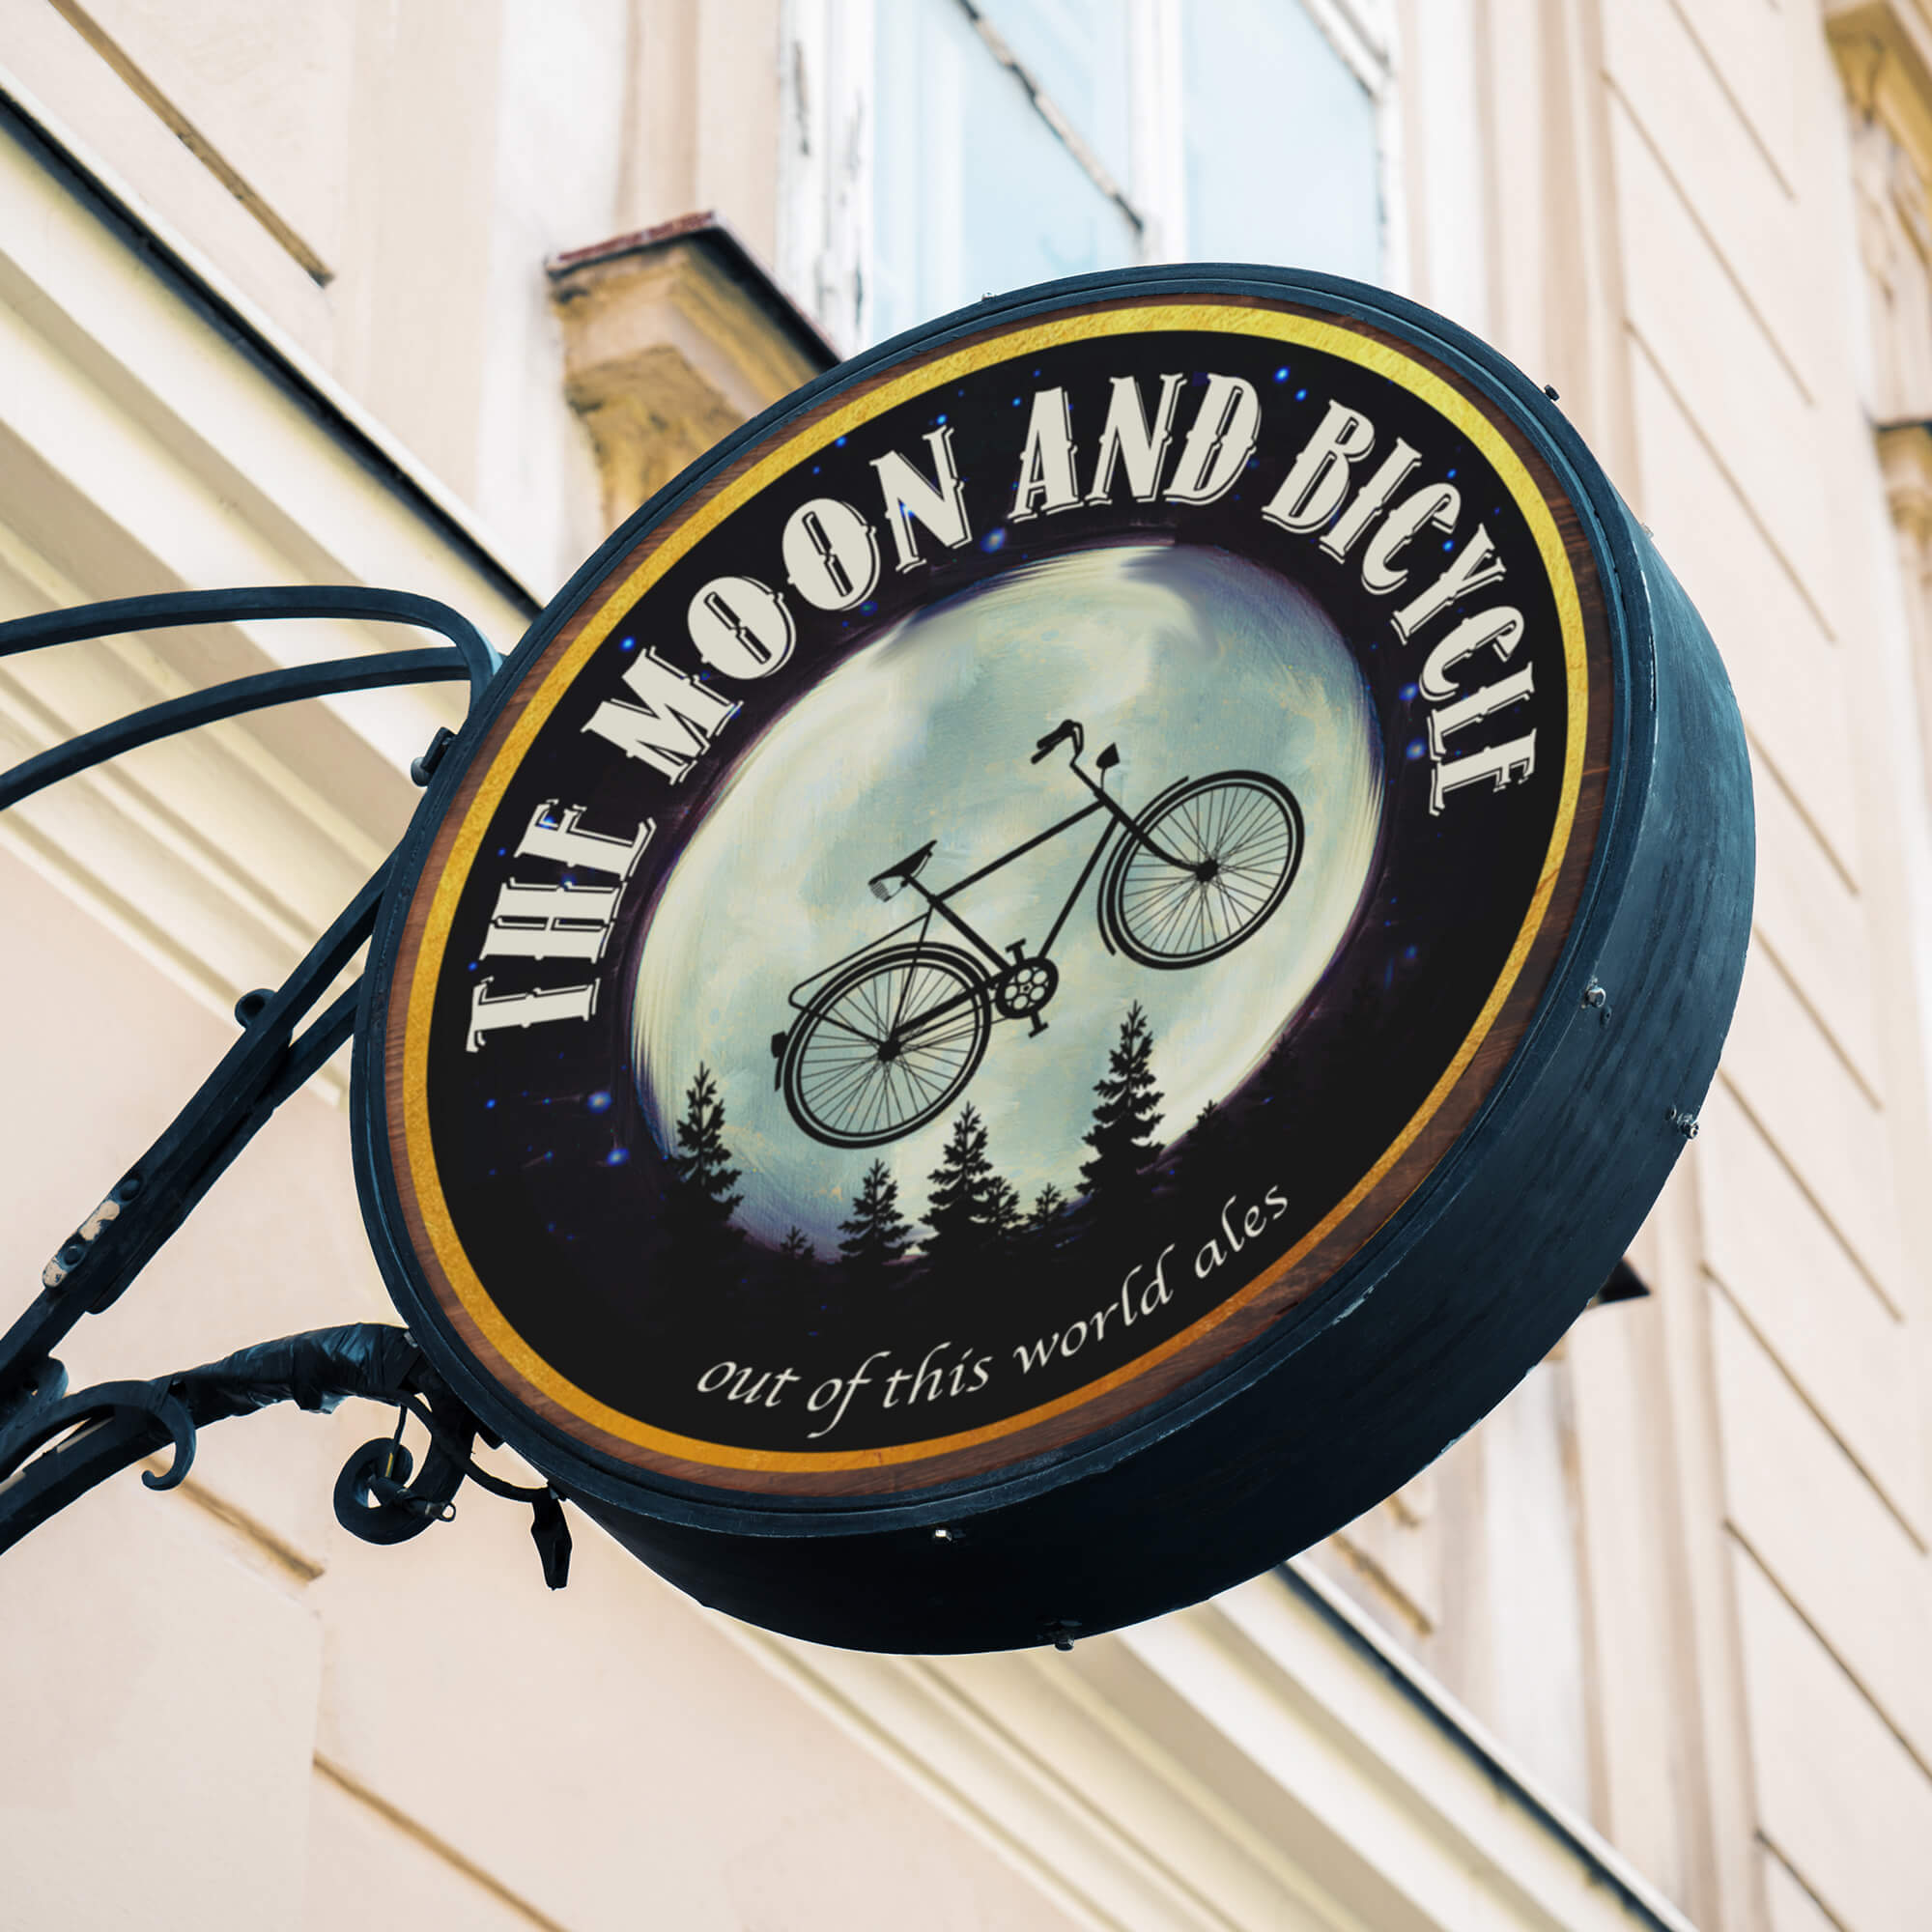 The moon and bicycle pub sign